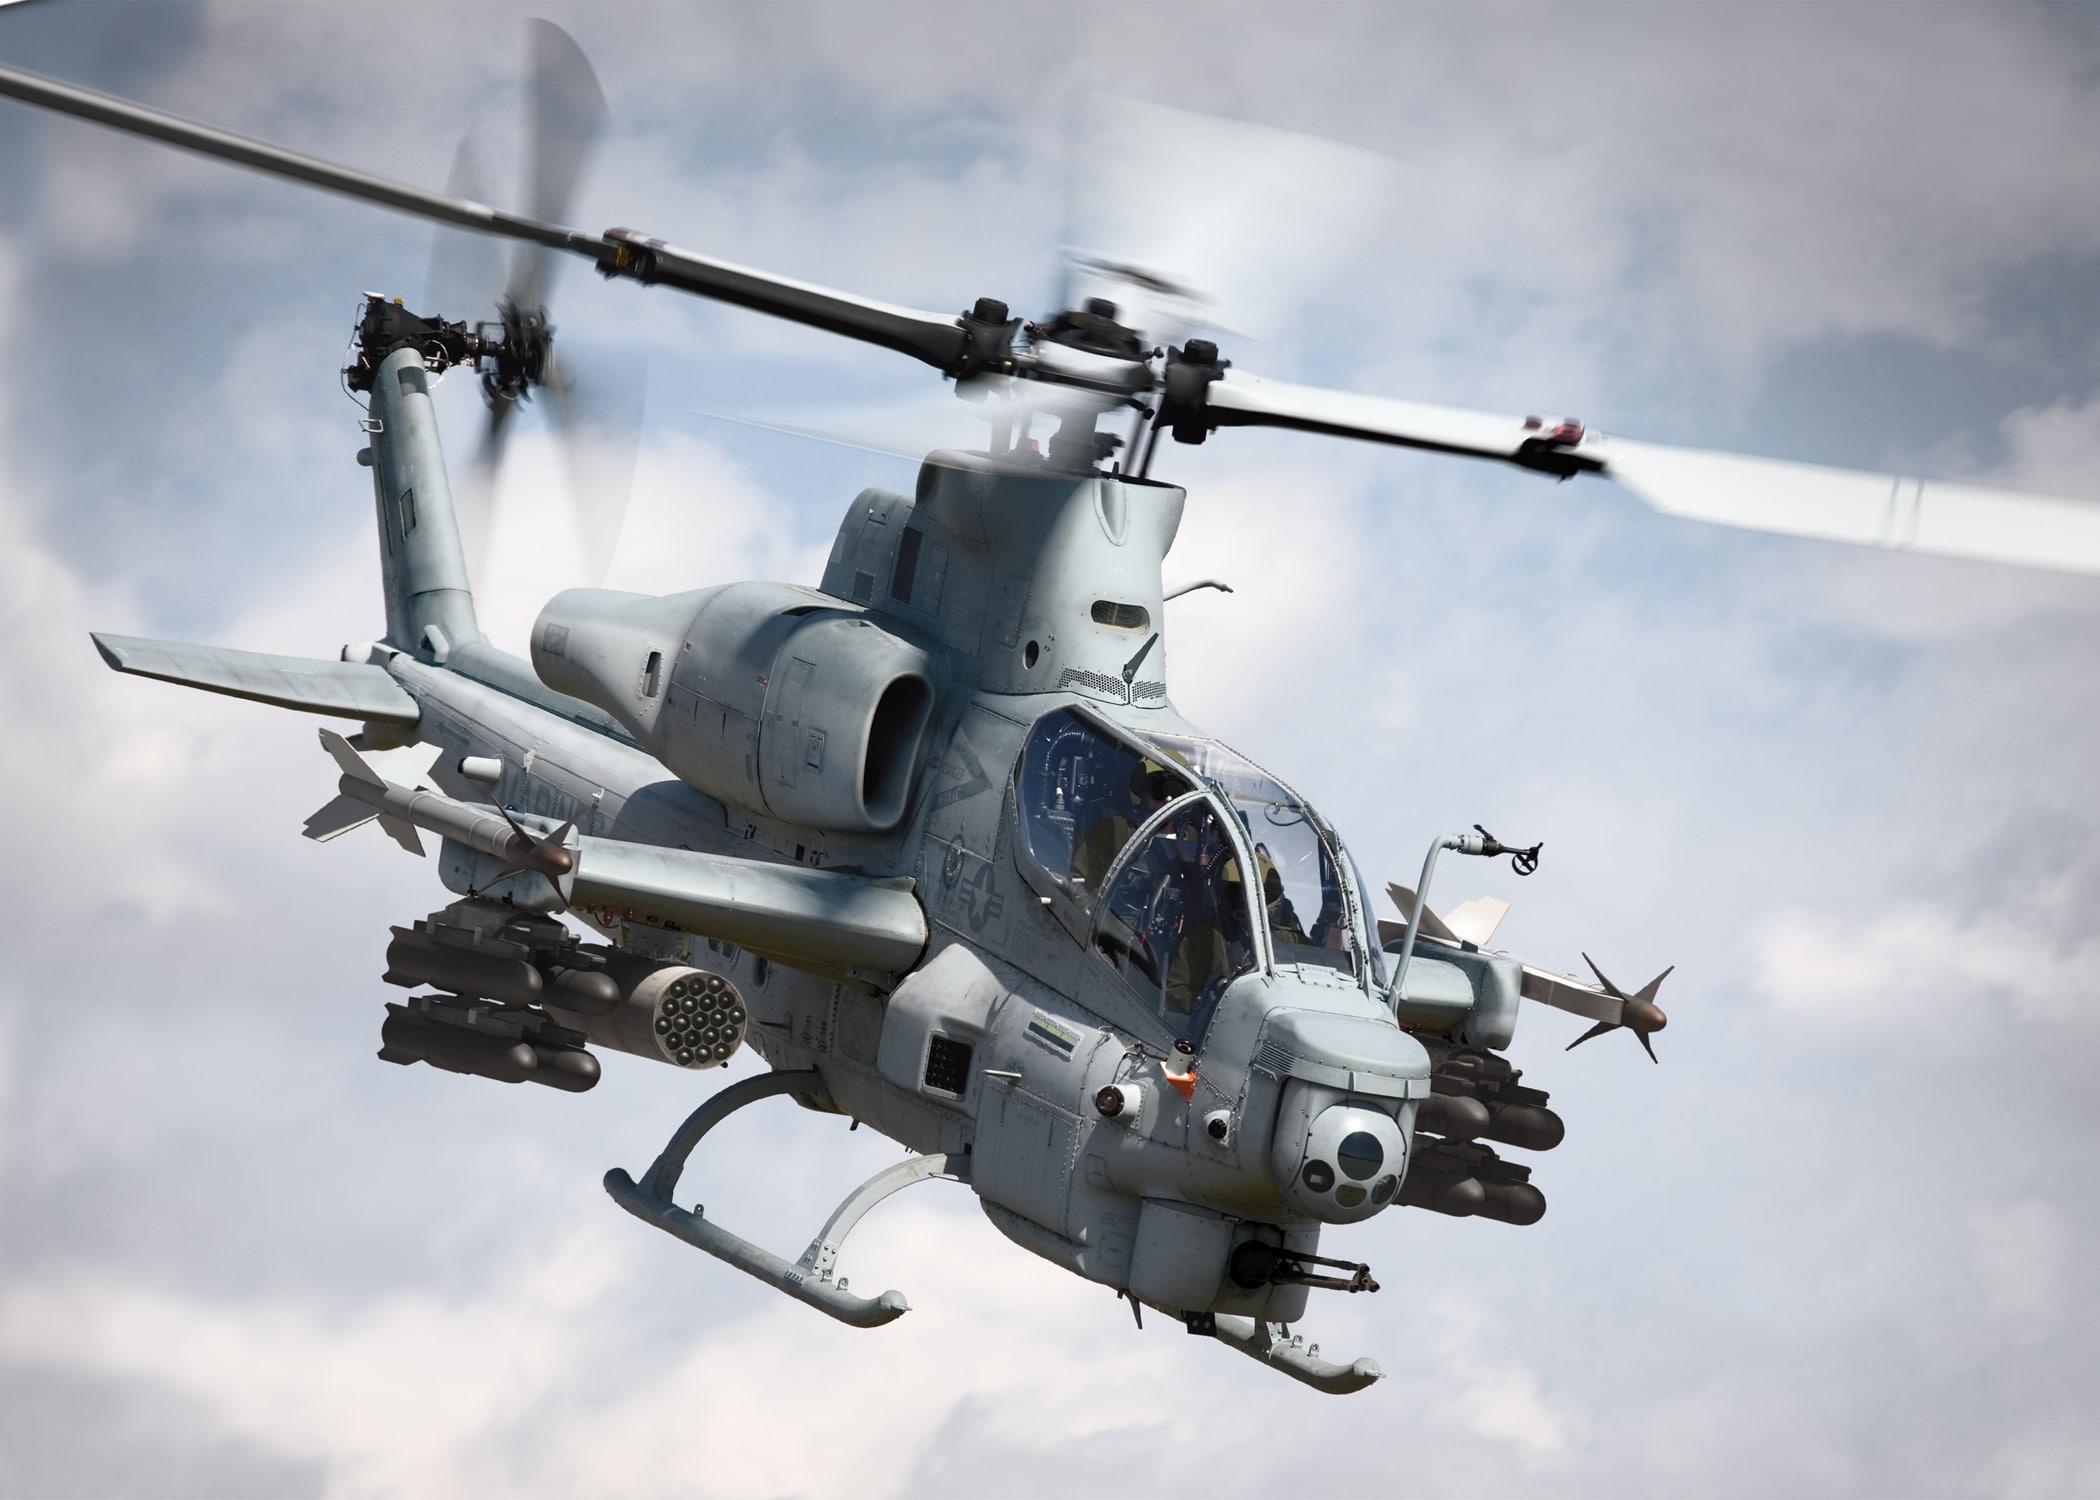 aircraft helicopters vehicles ah1 cobra Technology Vehicles HD Art